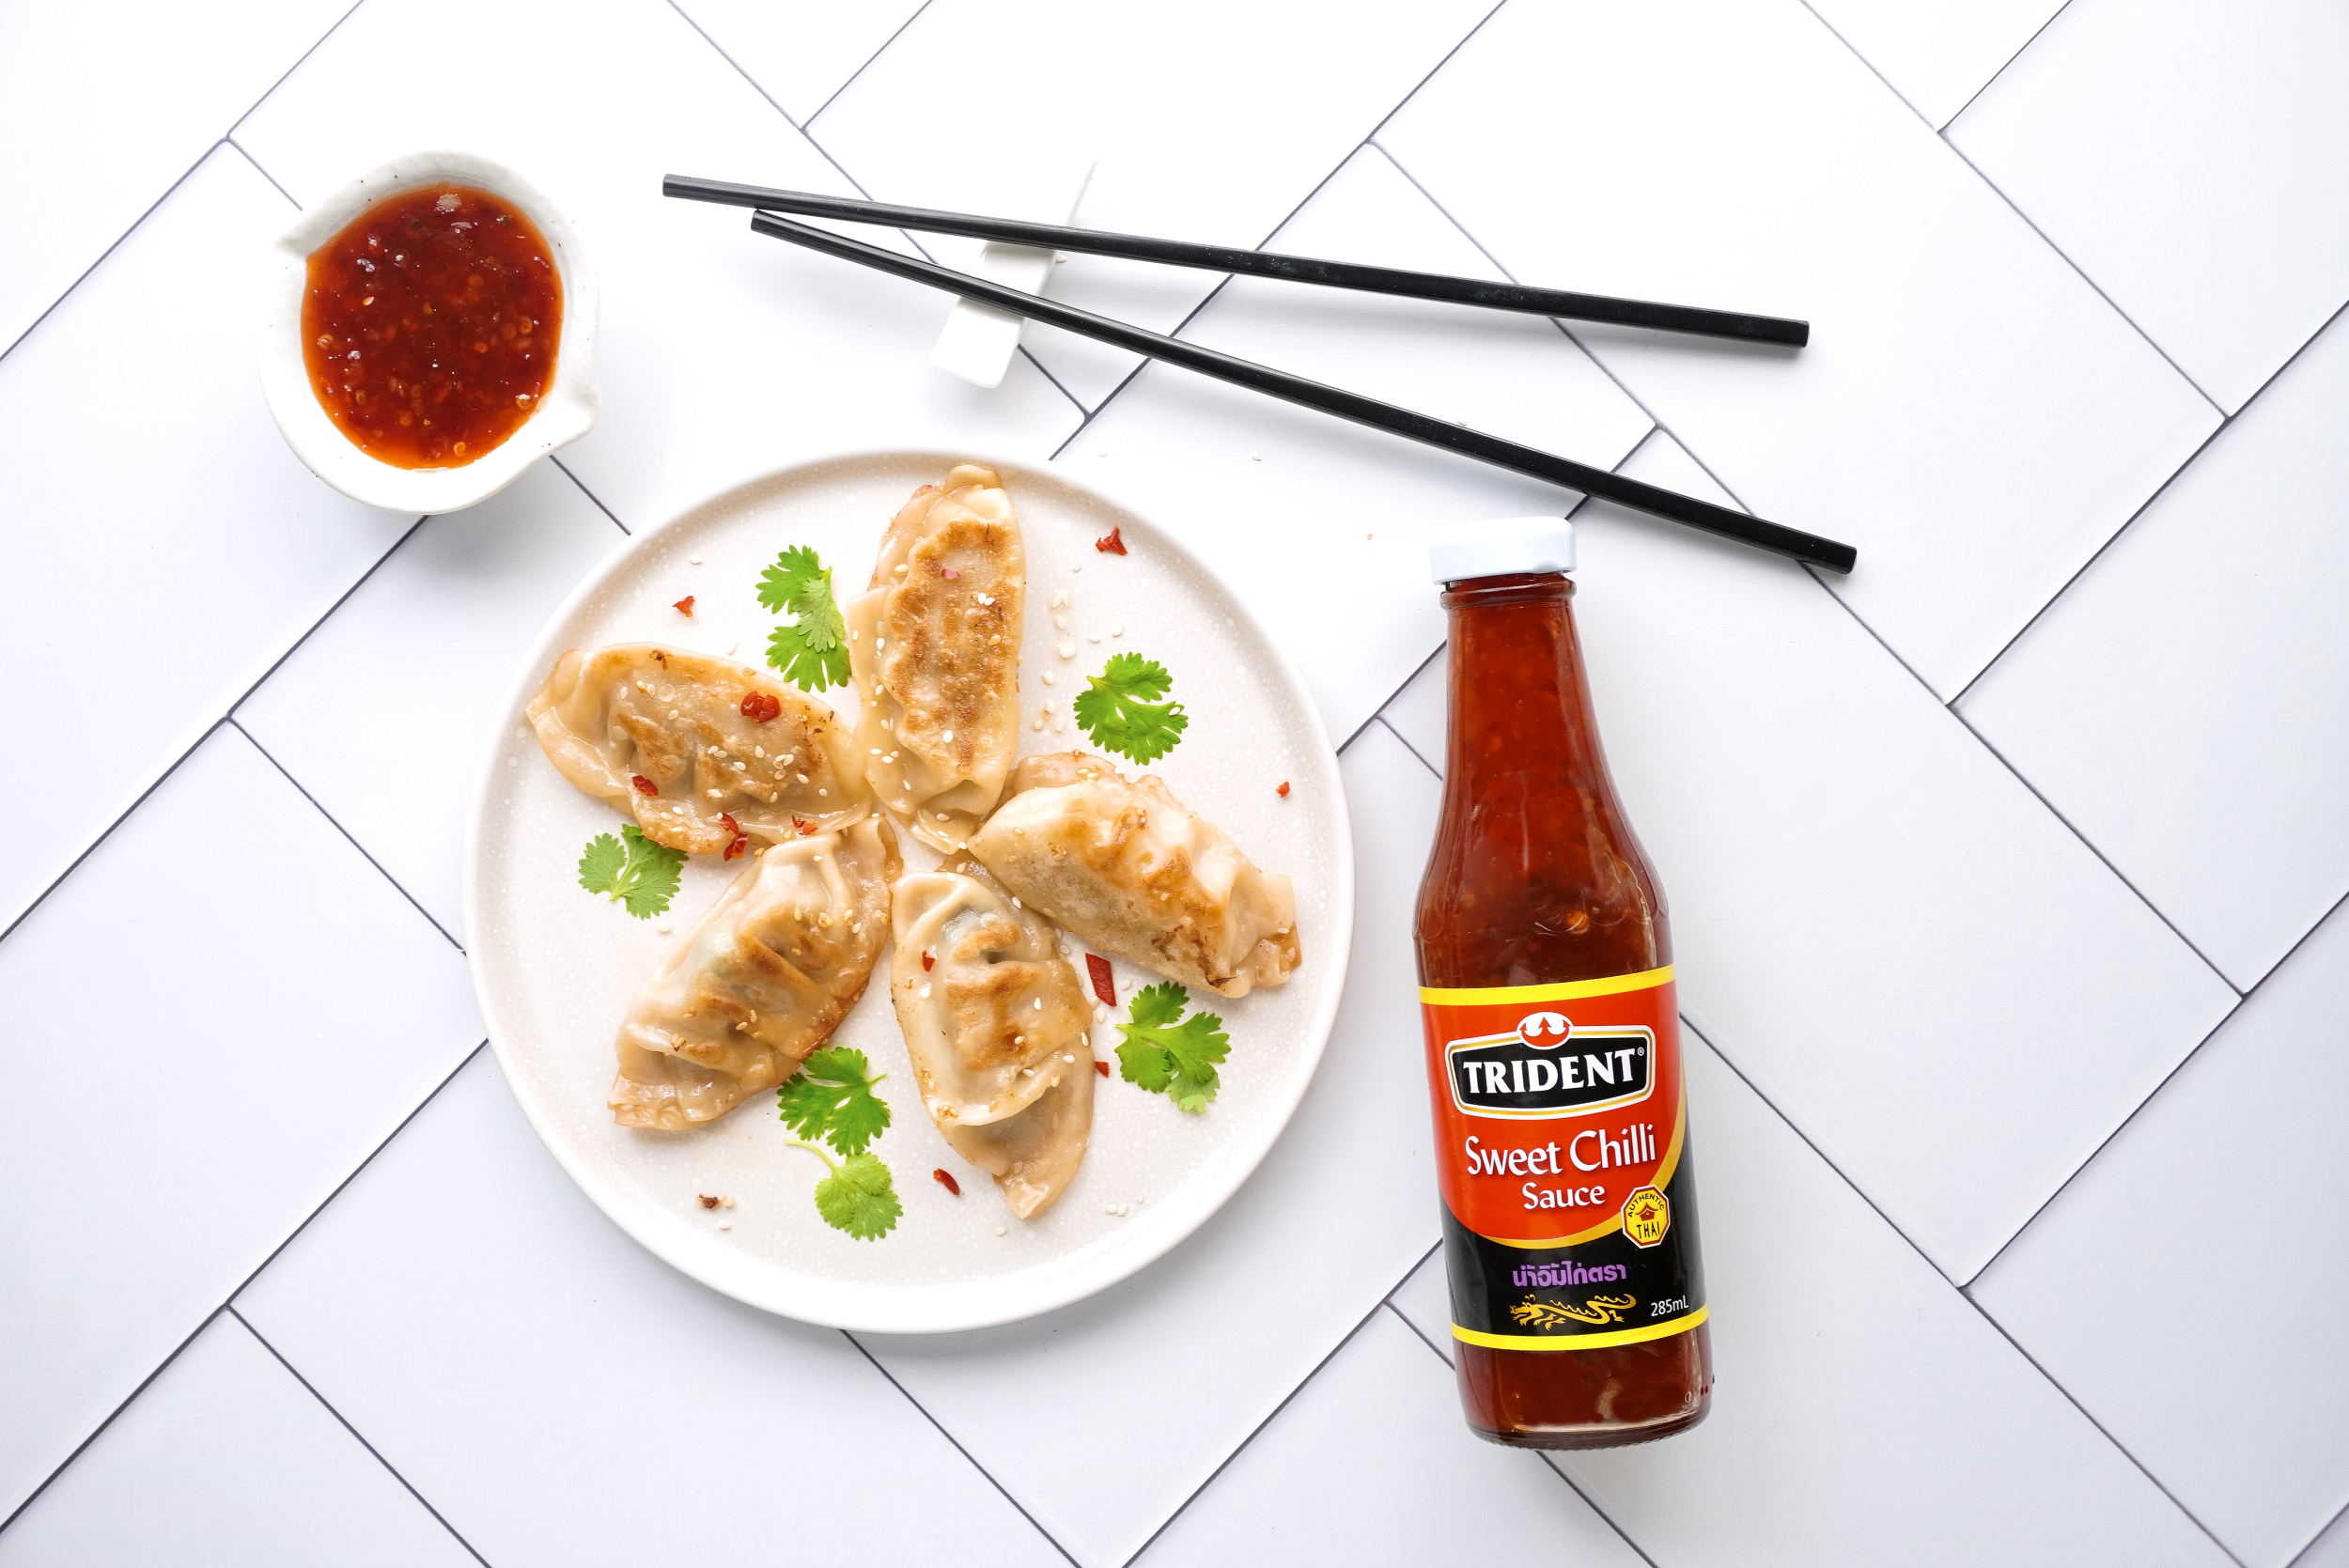 Pork and prawn dumplings with Tridents sweet chilli sauce